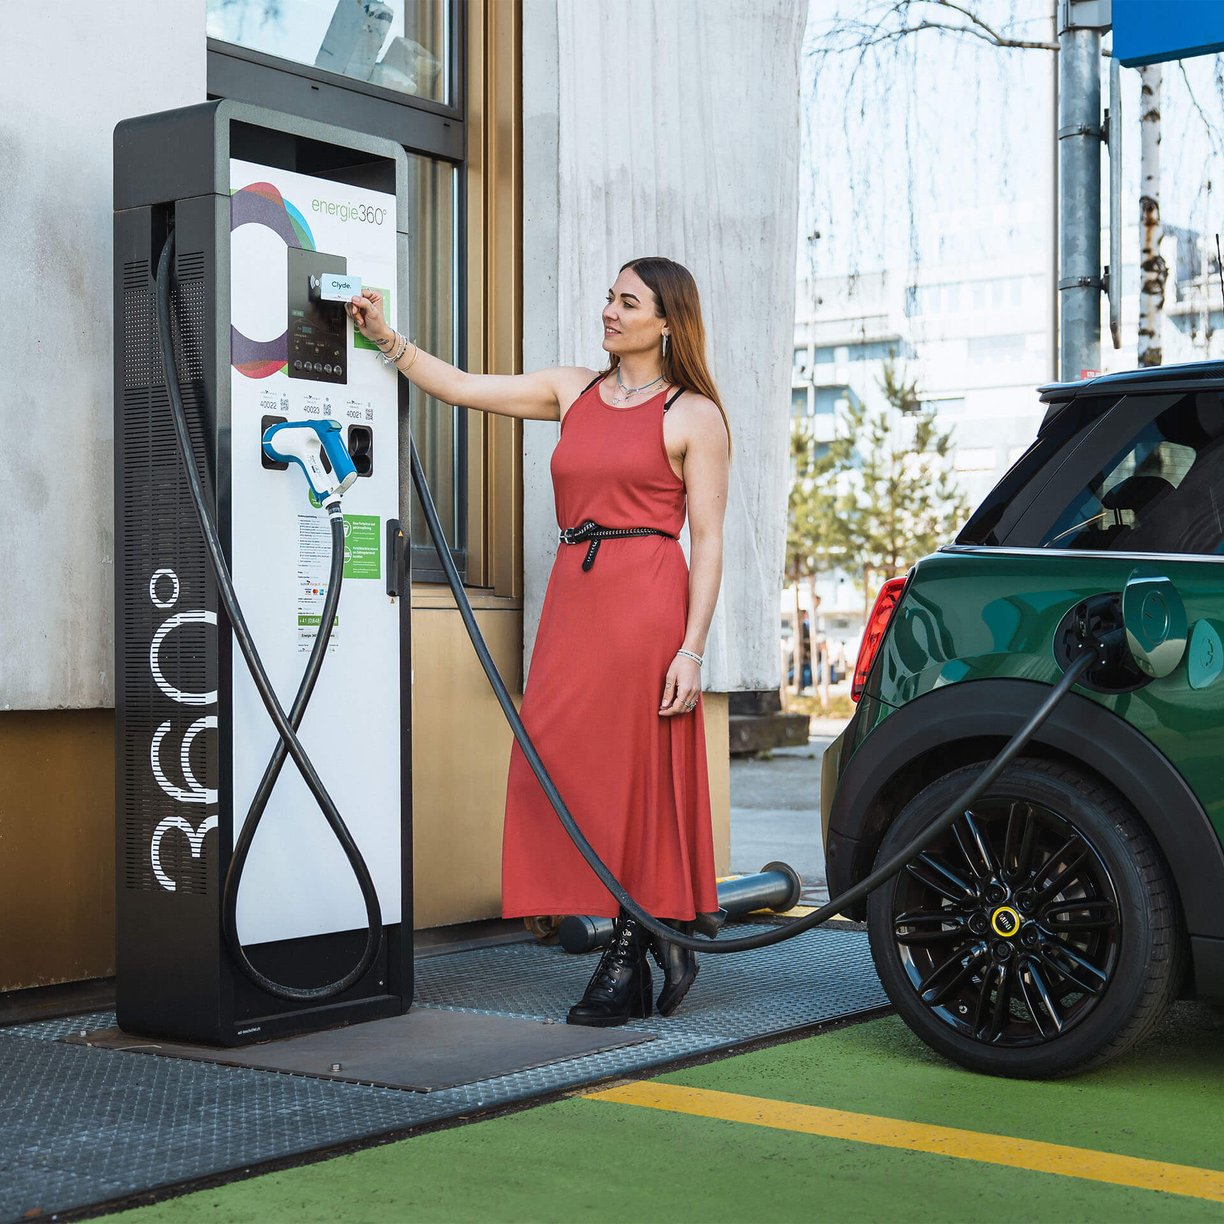 Clyde goes electric! Including e-car flat rate for charging.